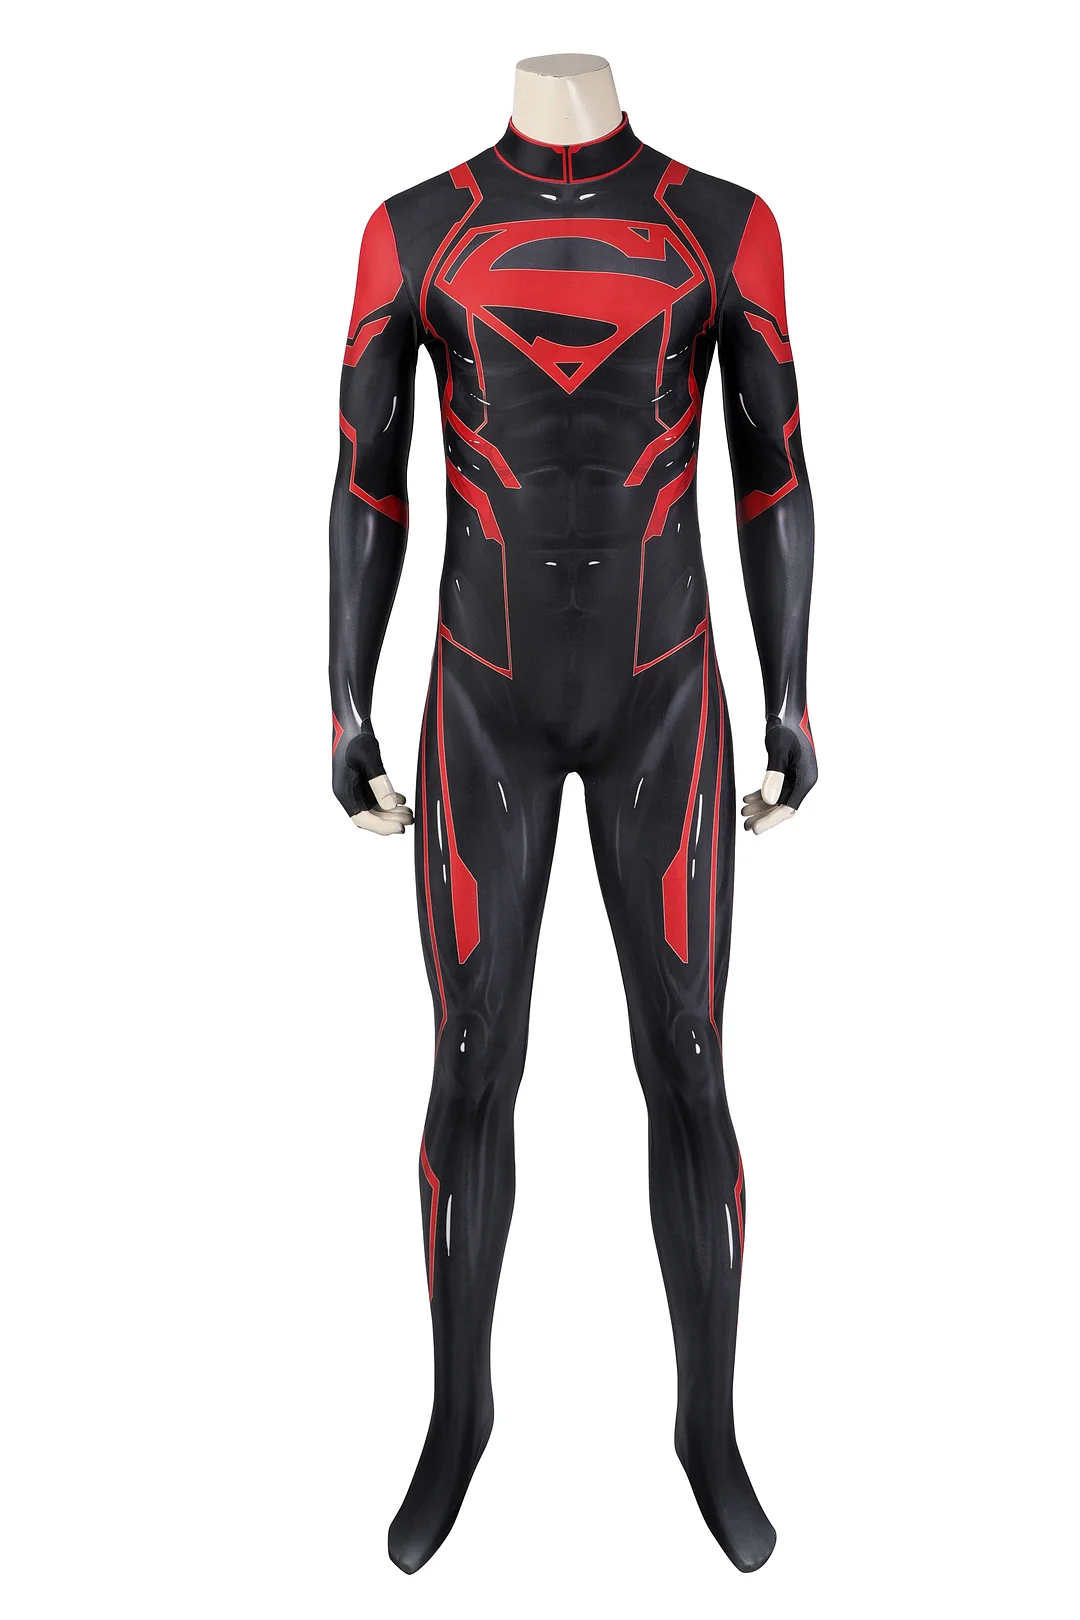 Young Justice Superboy New 52 Cosplay Suit Halloween Costume